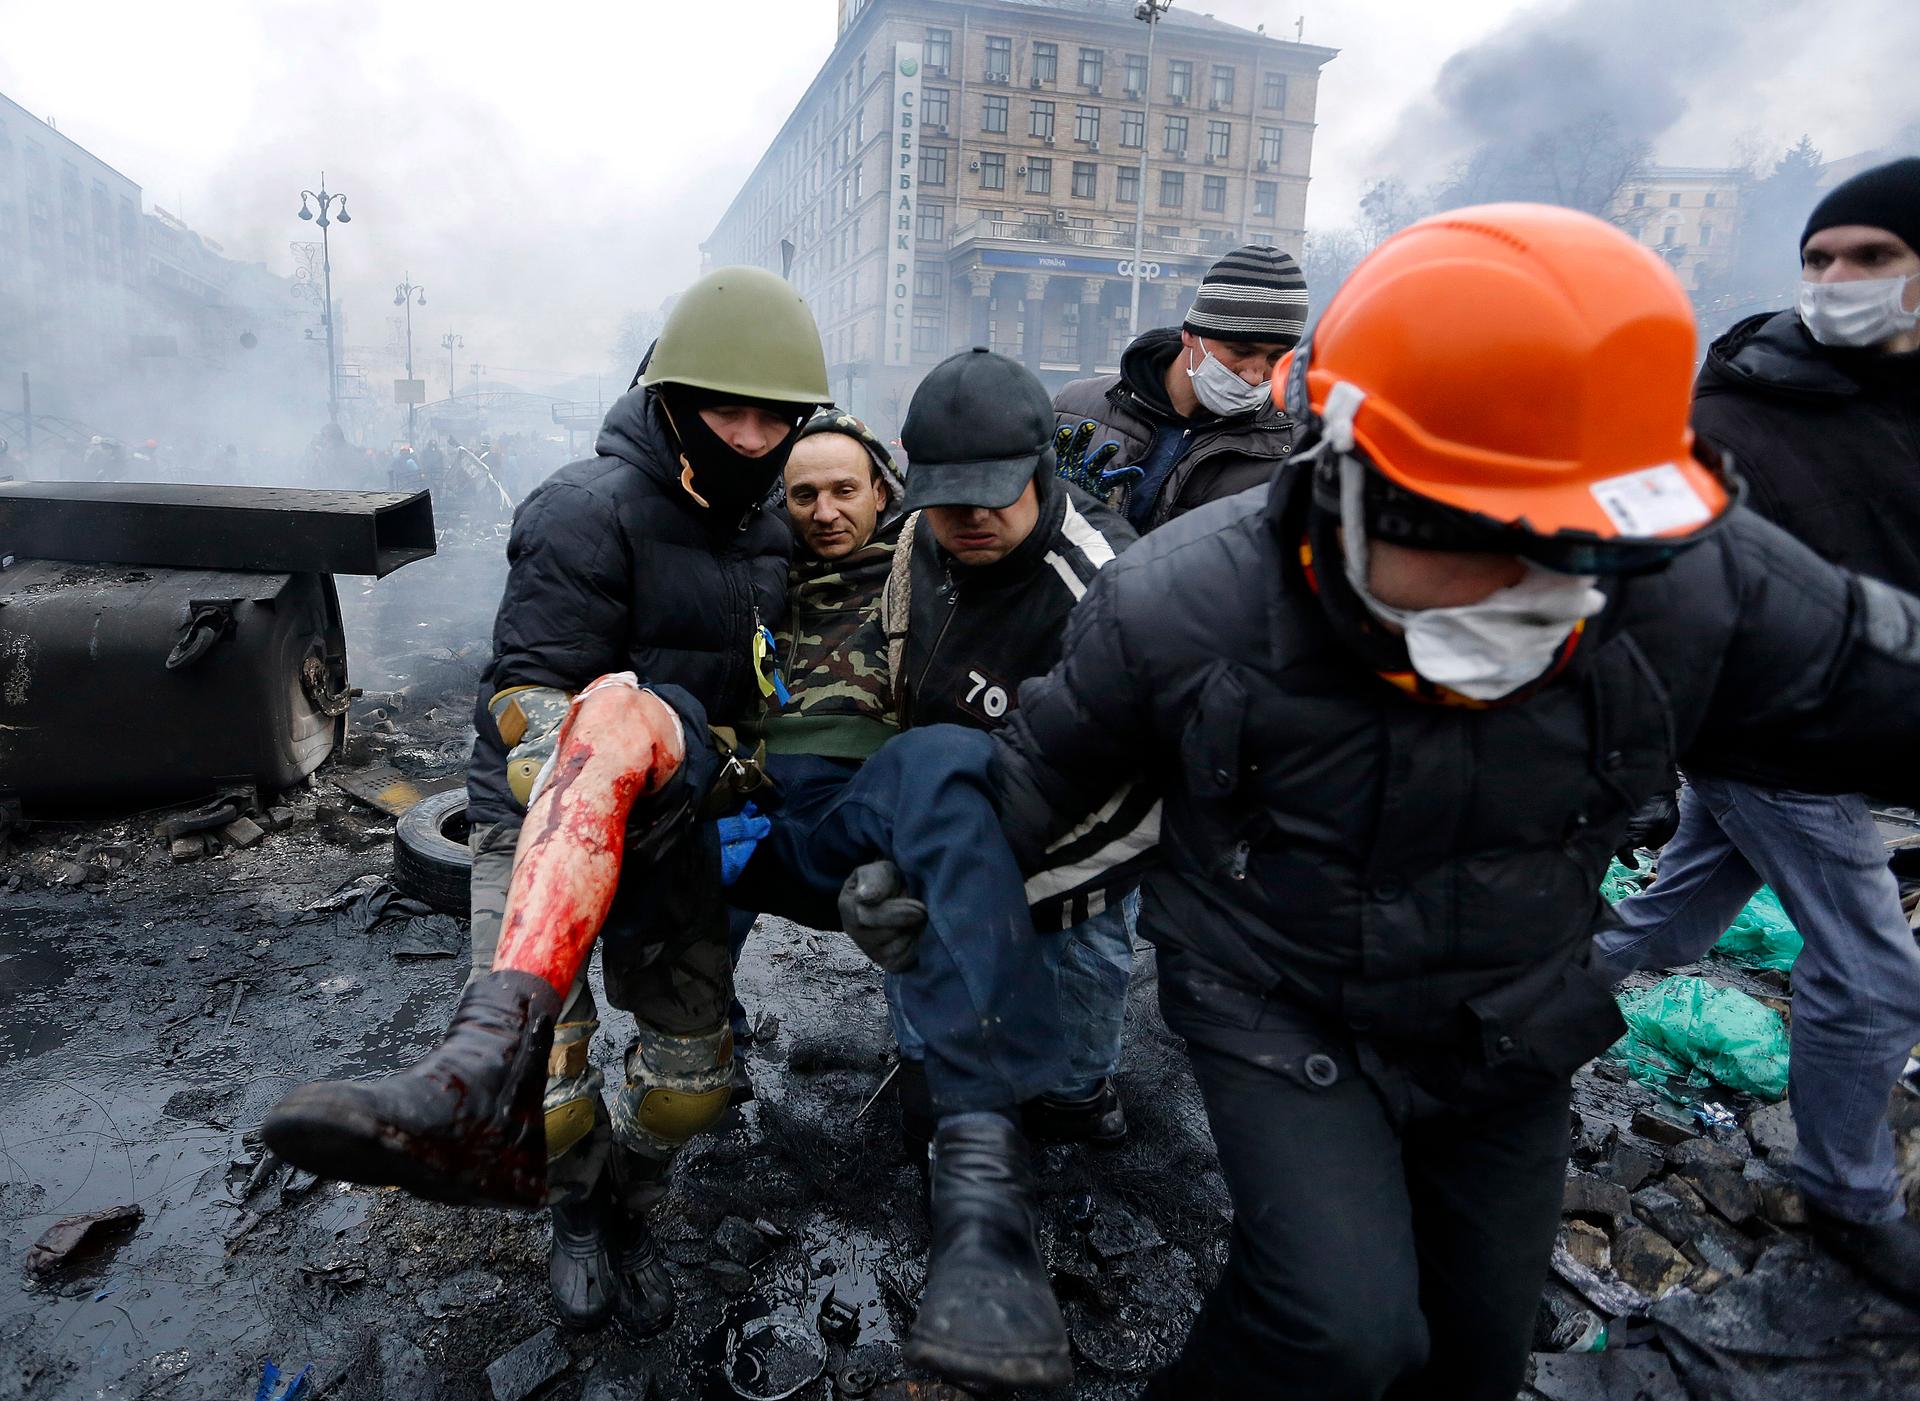 Anti-government protesters carry a man with a bullet wound on his leg during clashes with riot police in Independence Square in Kiev, February 20, 2014.